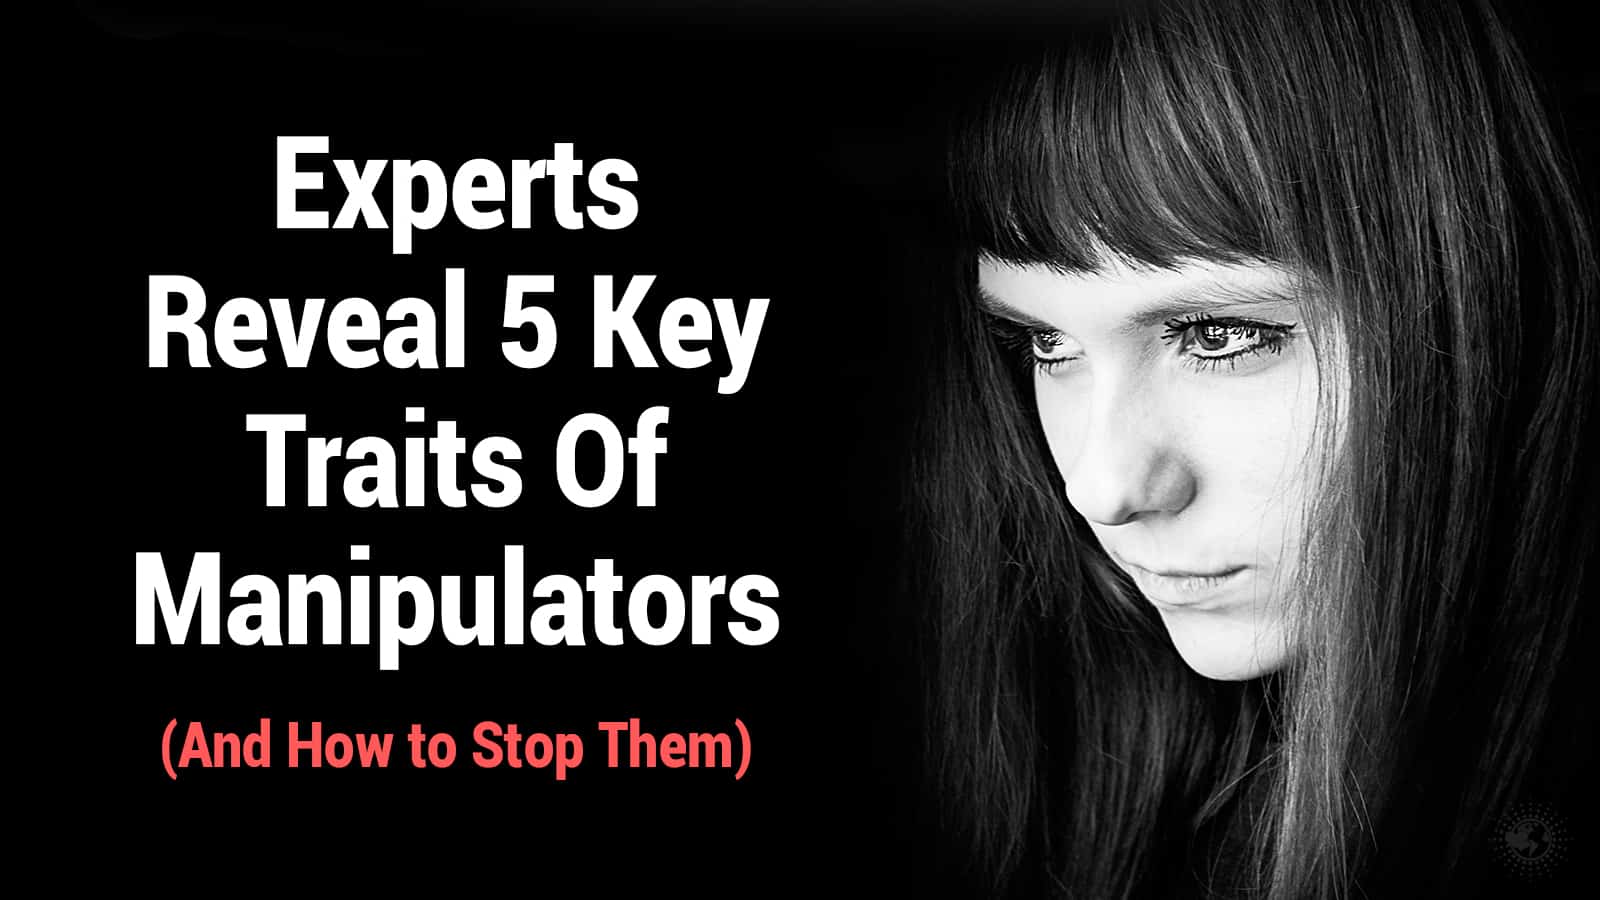 Experts Reveal 5 Key Traits Of Manipulators (And How to Stop Them)